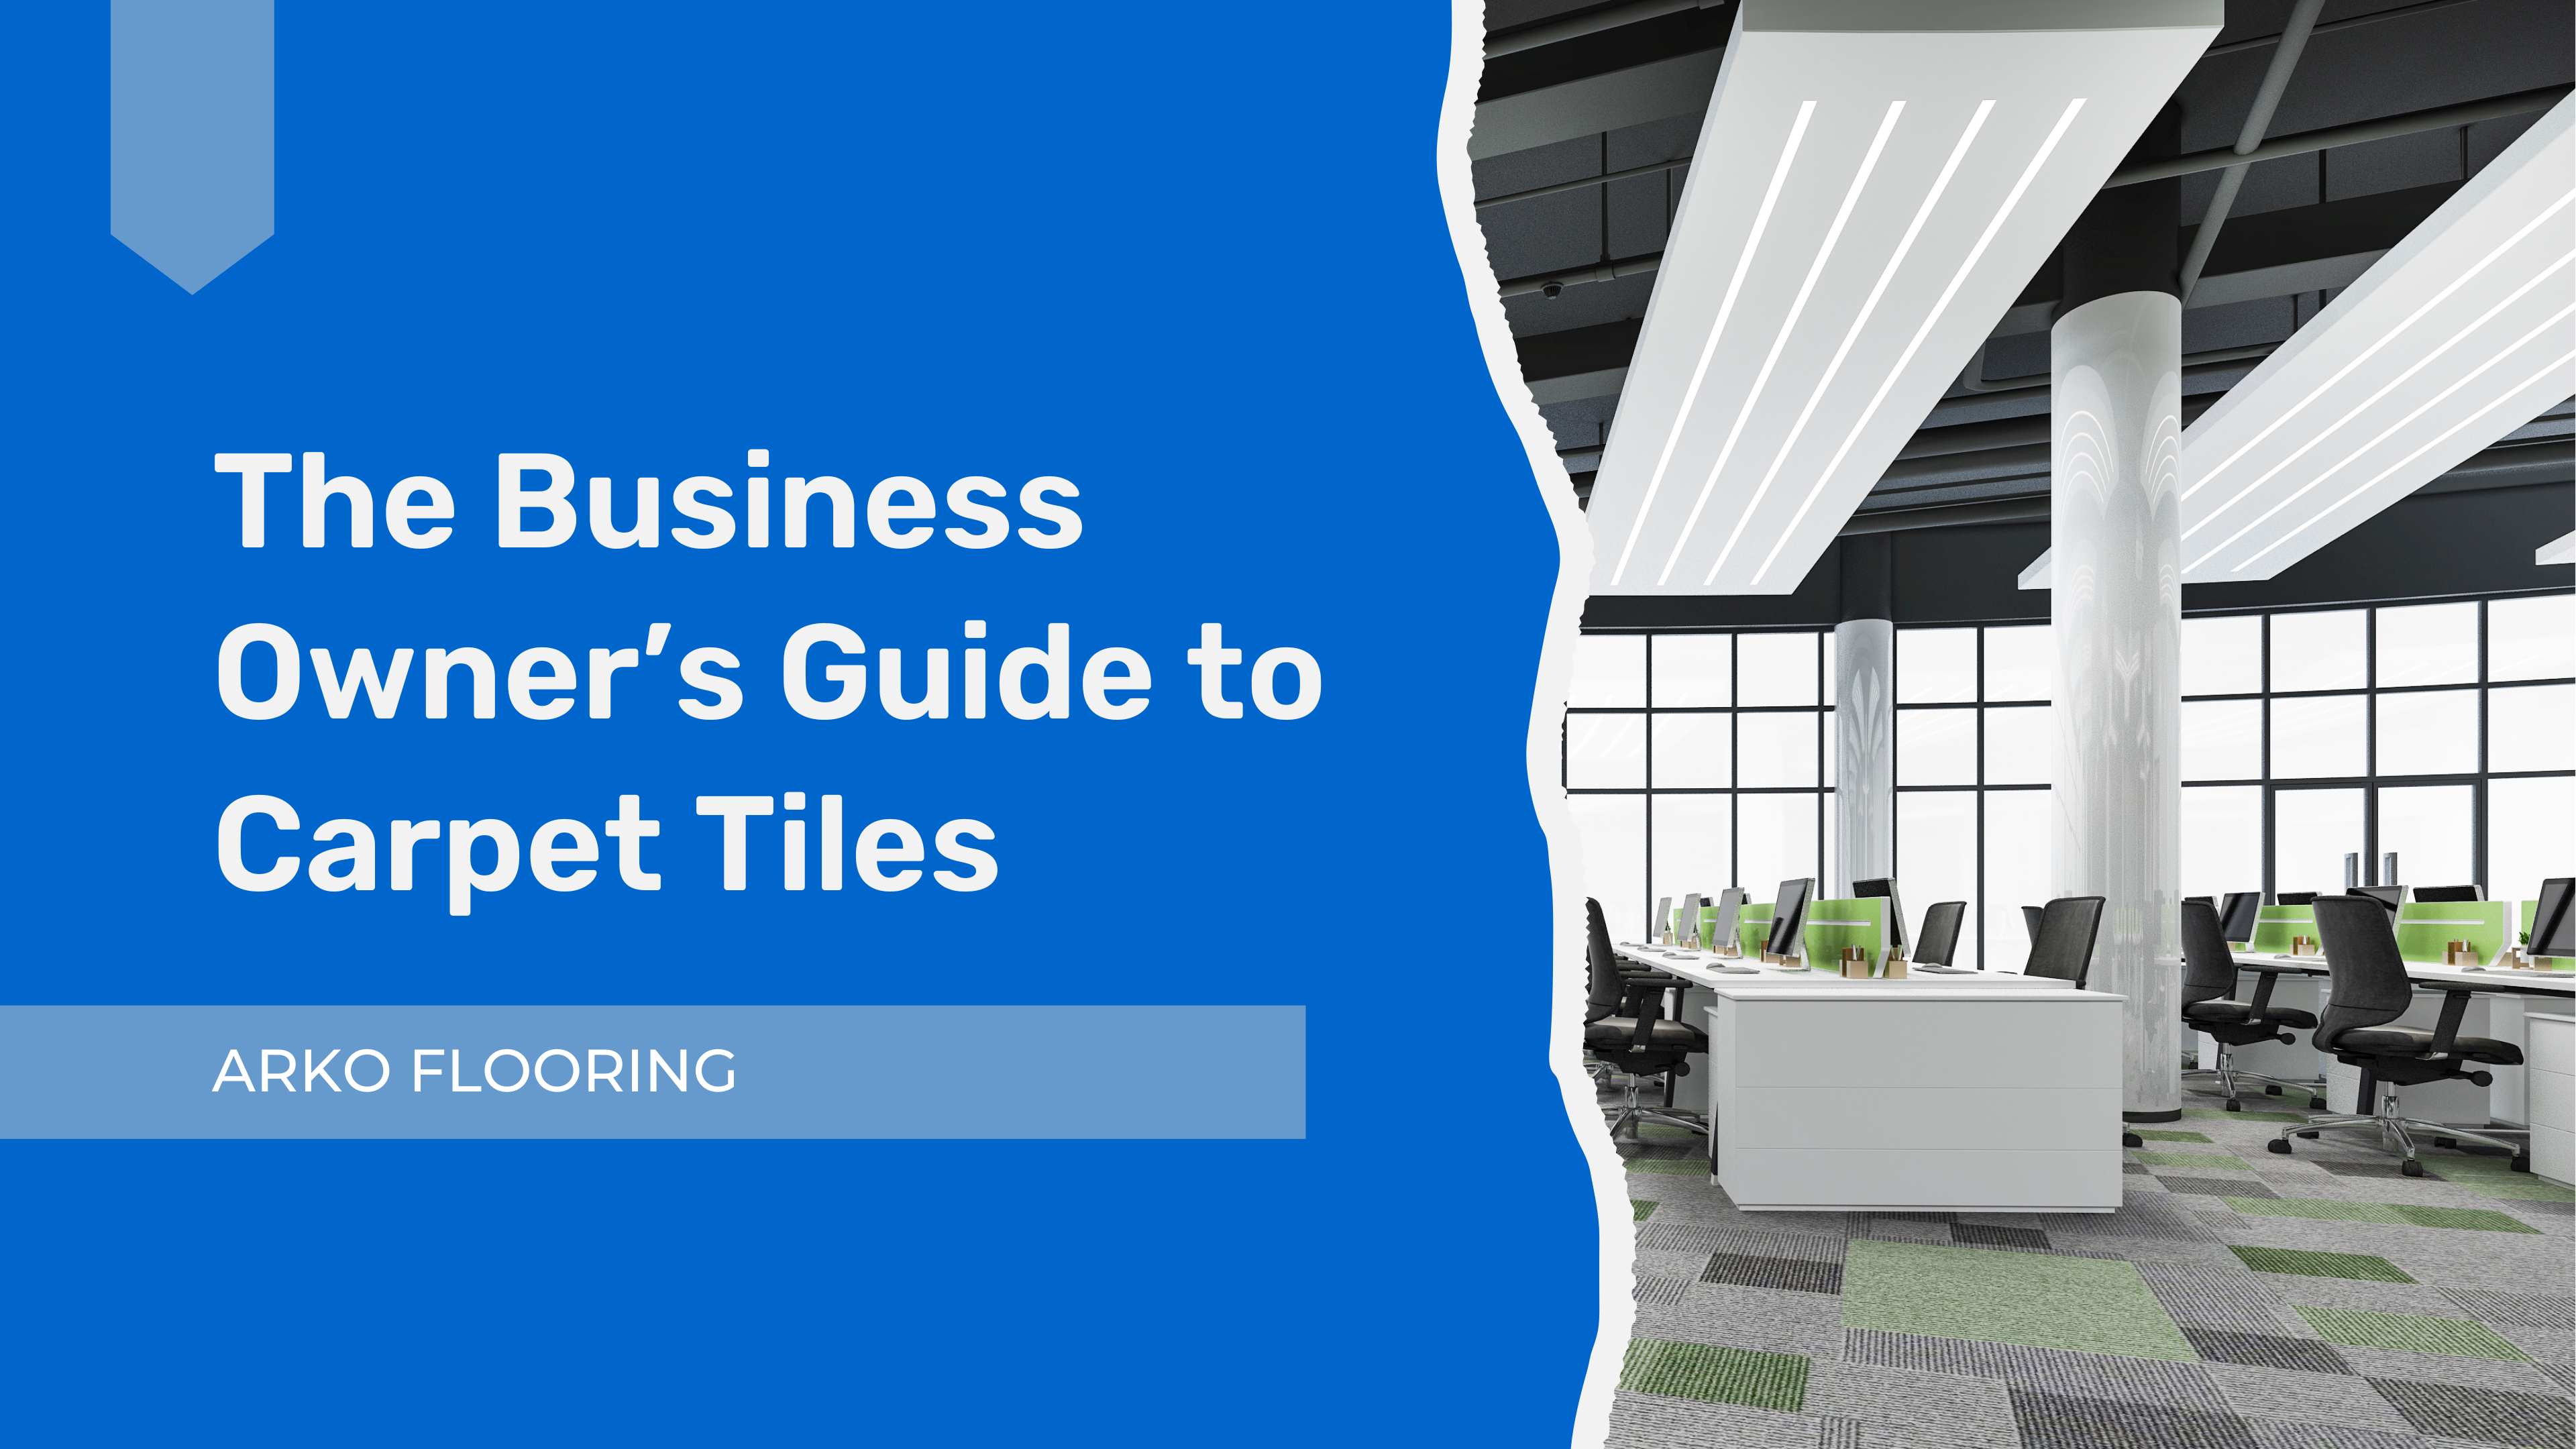 The Business Owner’s Guide to Carpet Tiles